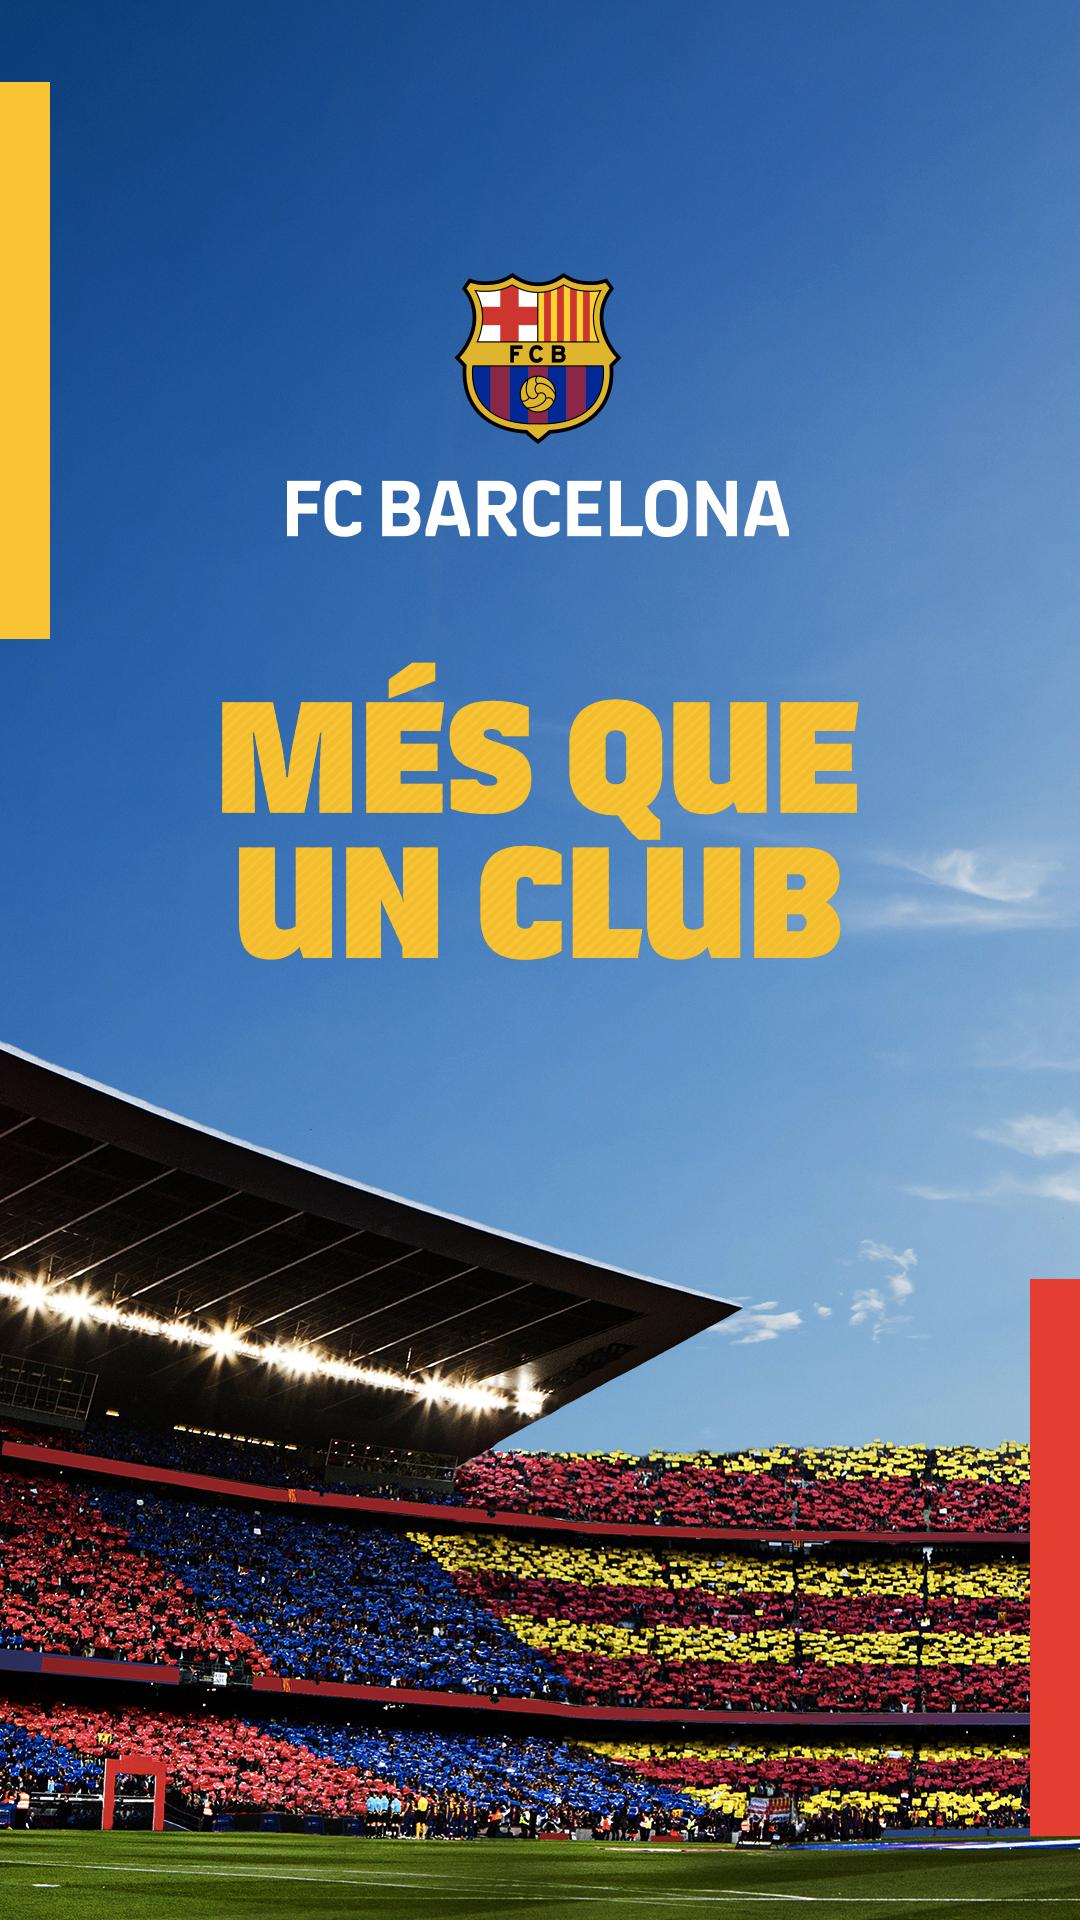 Culers - Barça Wallpapers | Canal Oficial FC Barcelona